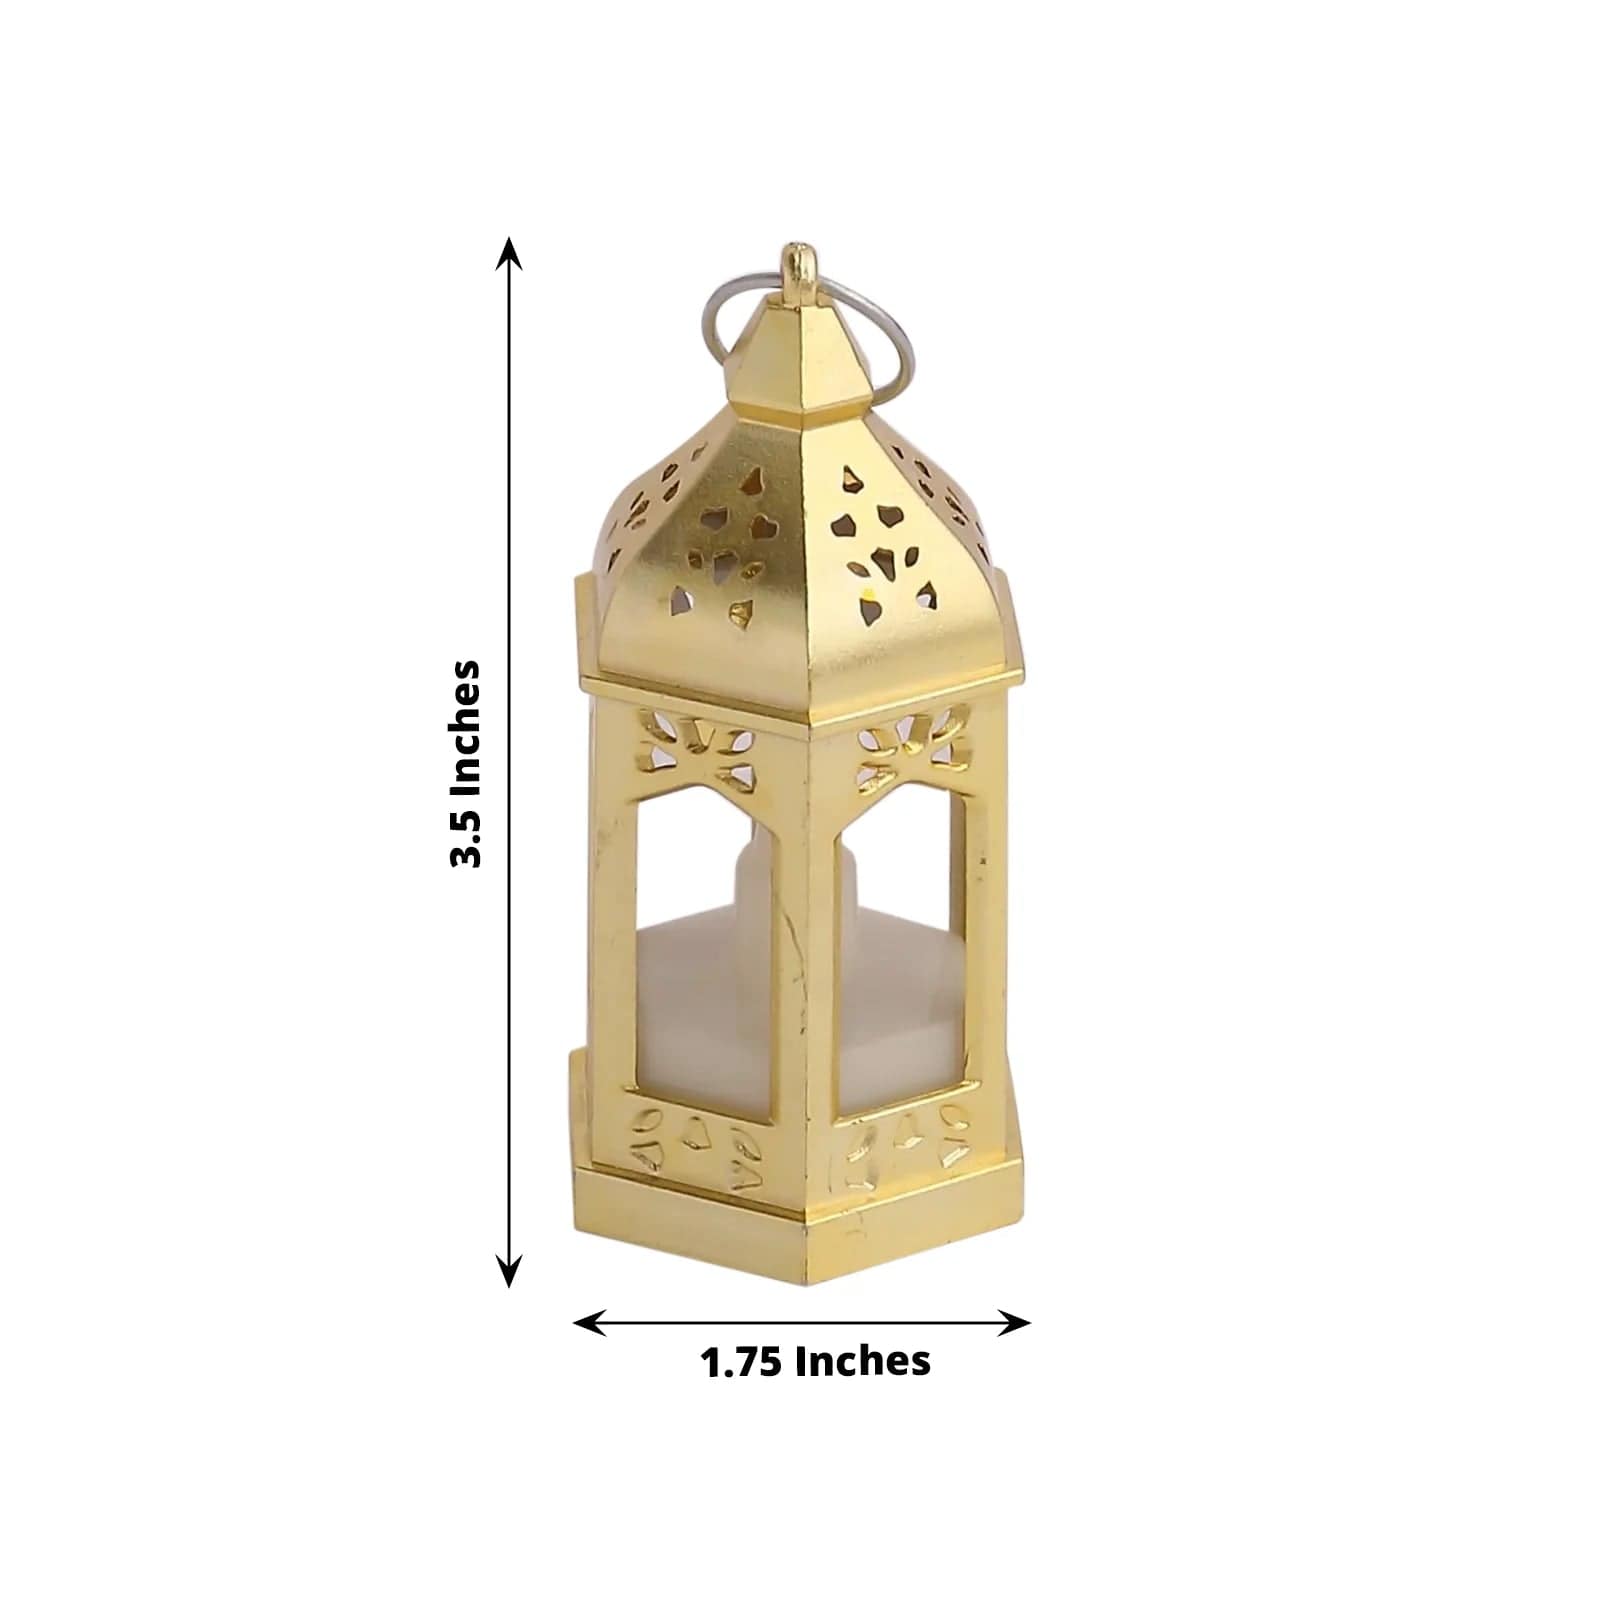 6 Gold Plastic Mini Lantern Lamps with Battery Operated LED Tealight Candles